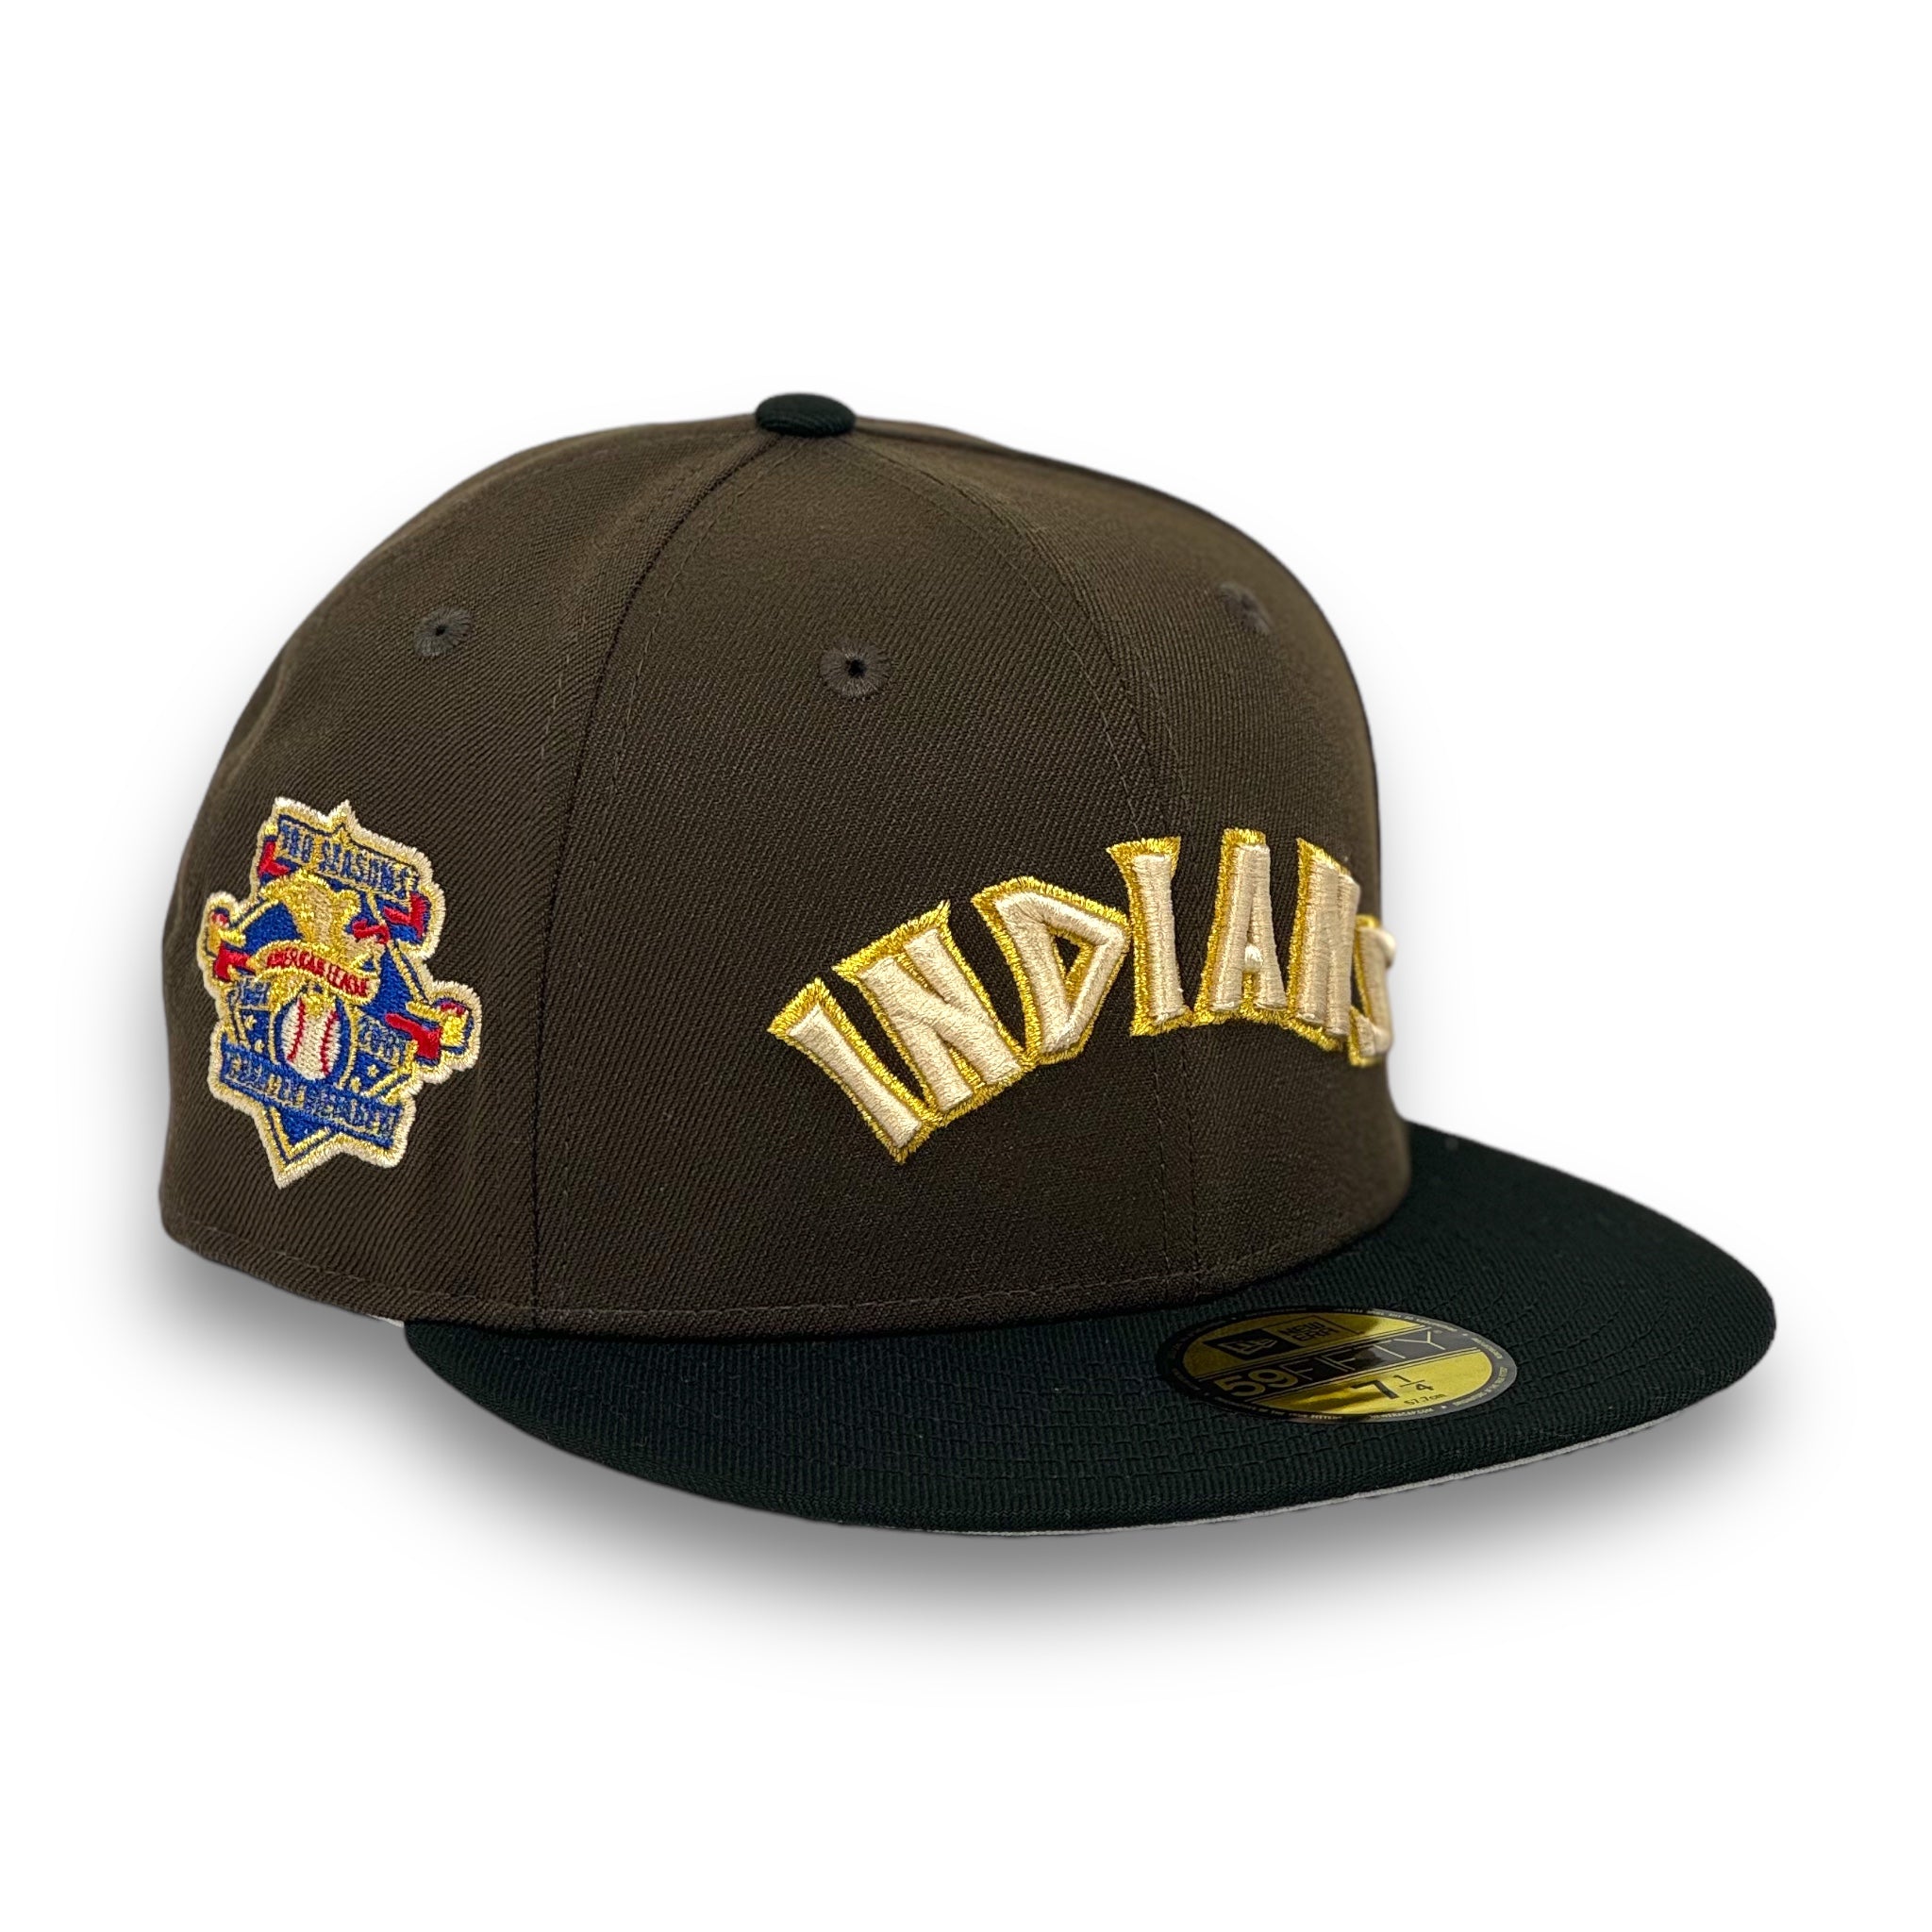 CLEVELAND INDIANS (BROWN) (MLB 100TH ANN) NEW ERA 59FIFTY FITTED (GREY UNDER VISOR)